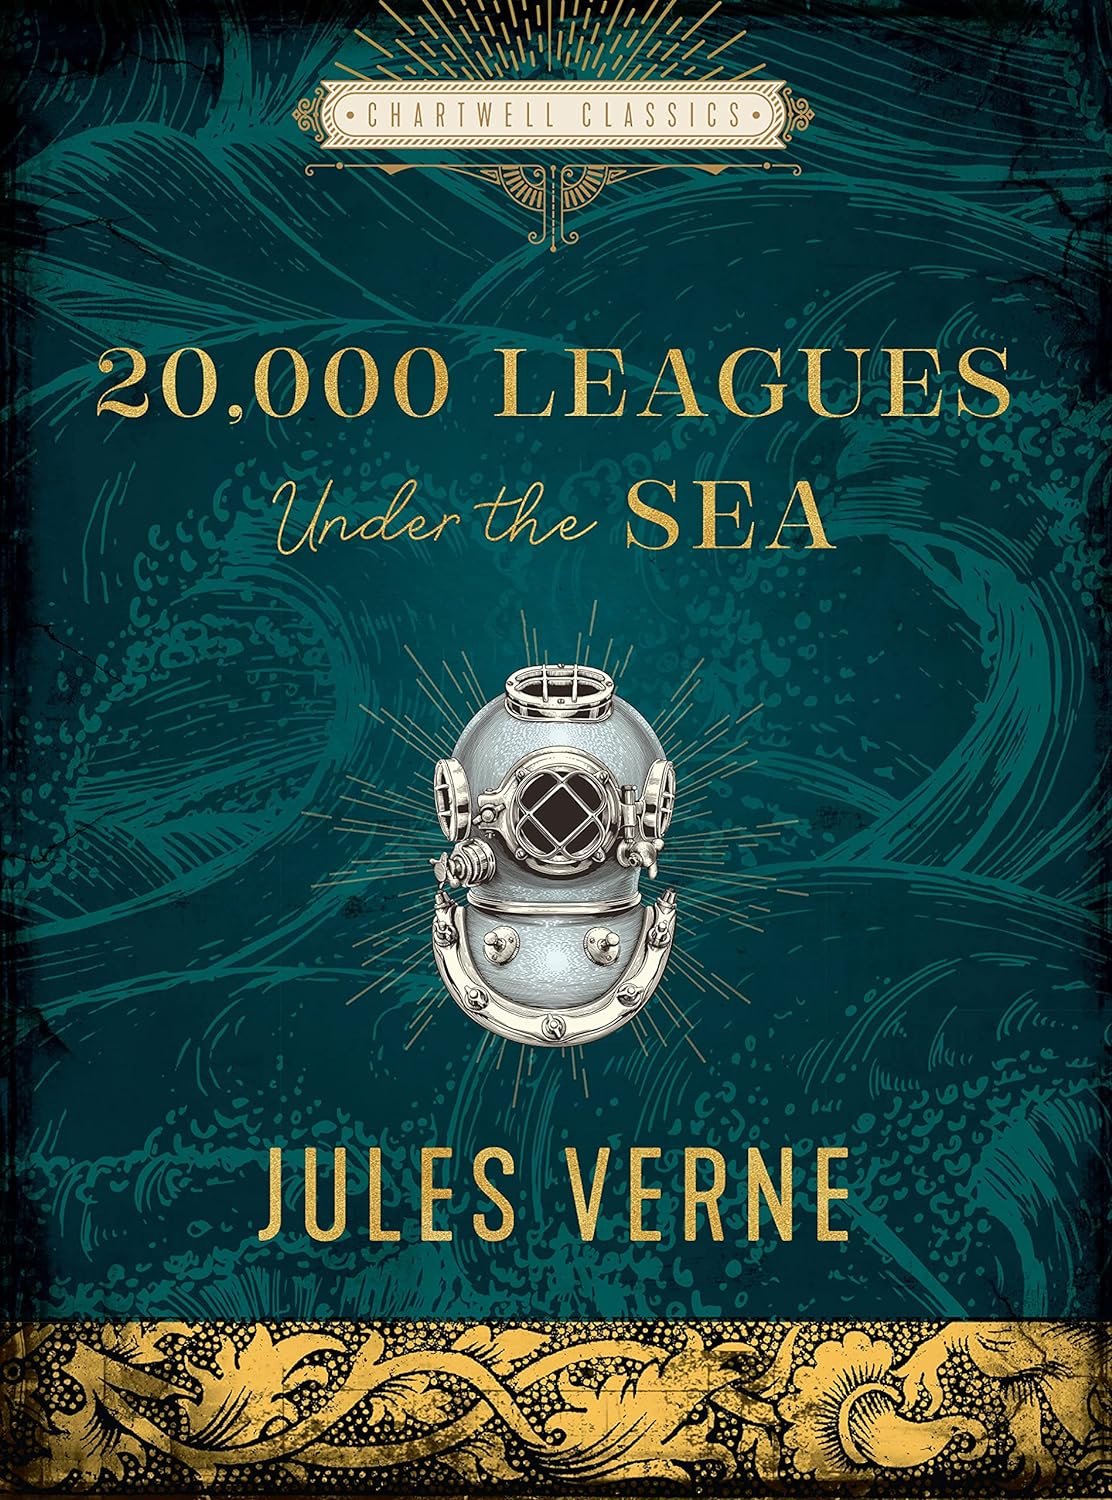 20,000 Leagues Under the Sea - Jules Verne (Pre-Loved)